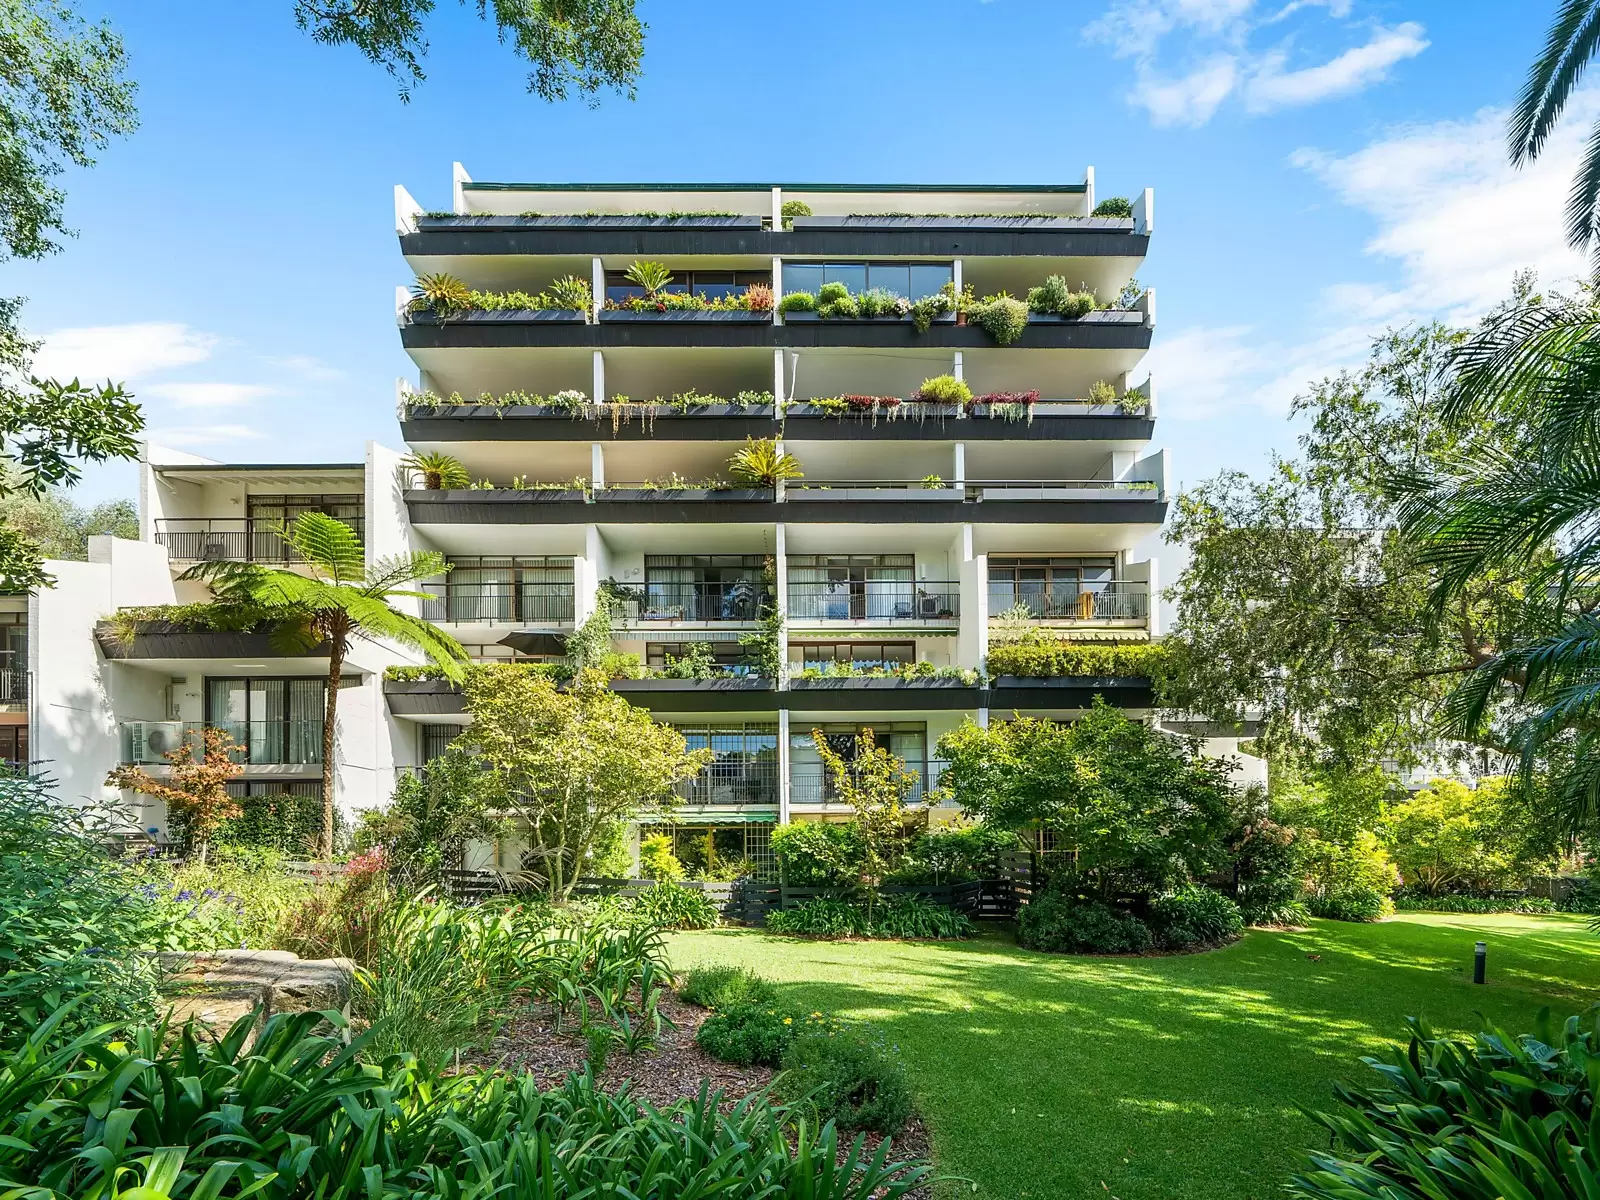 Photo #12: 25/16-18 Rosemont Avenue, Woollahra - Sold by Sydney Sotheby's International Realty